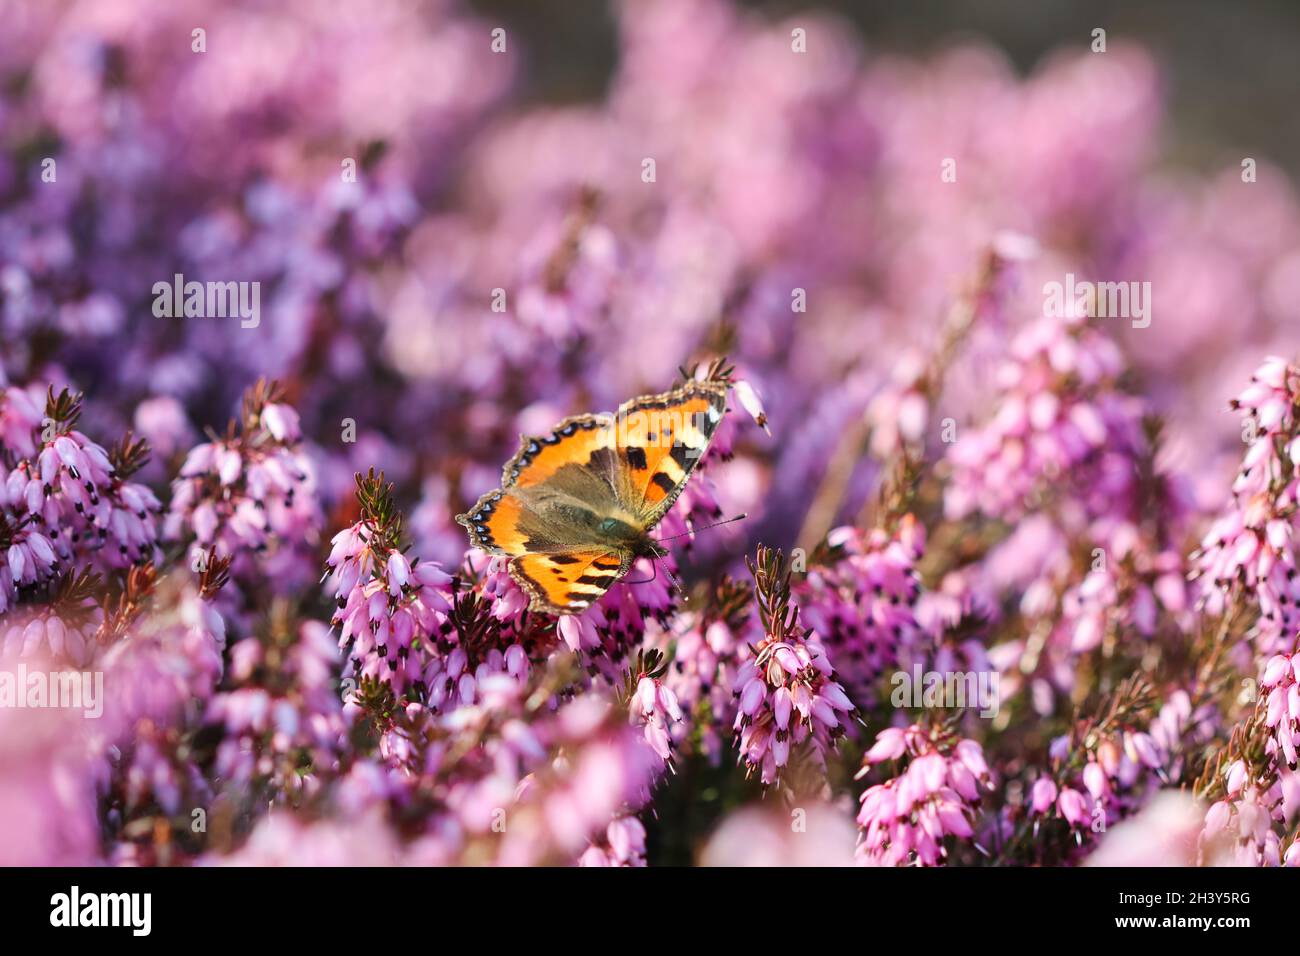 Pink Erica Carnea flowers (Winter Hit) and a butterfly in a spring garden Stock Photo